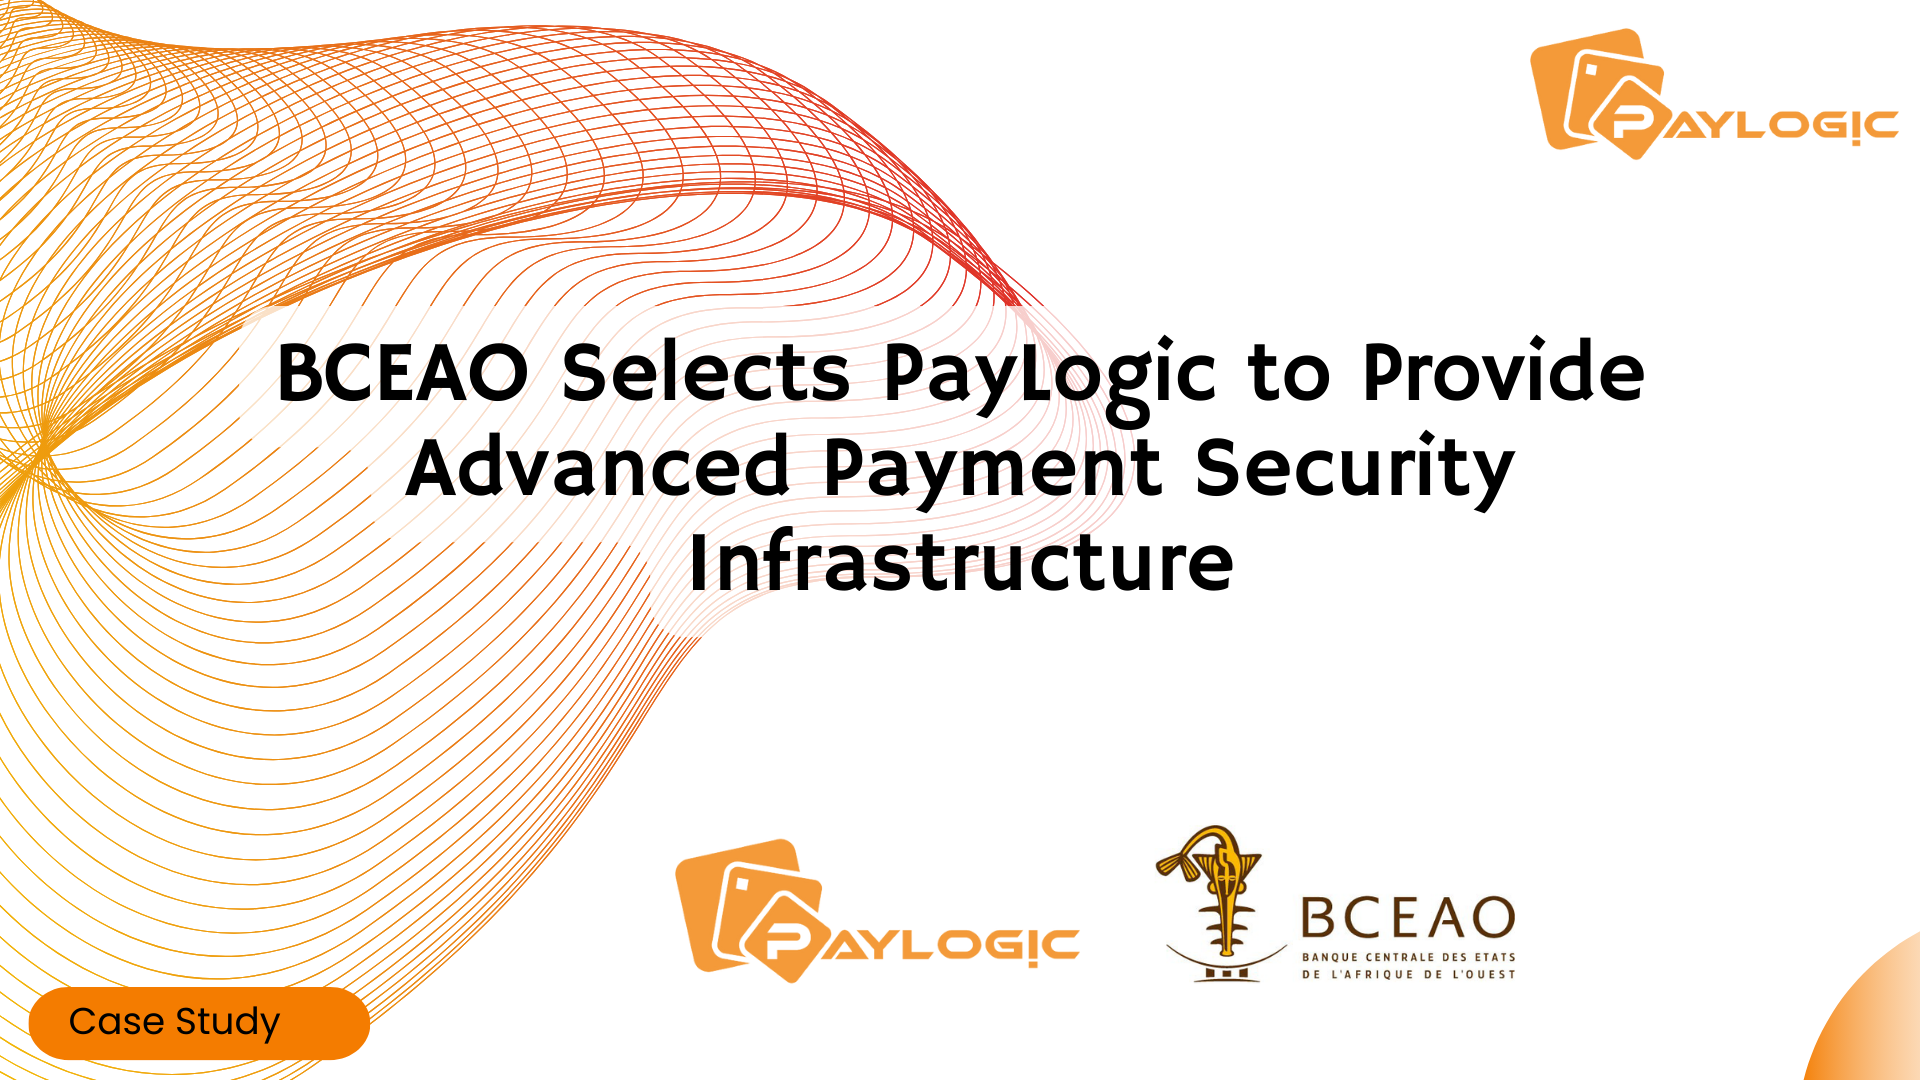 BCEAO Selects PayLogic to Provide Advanced Payment Security Infrastructure